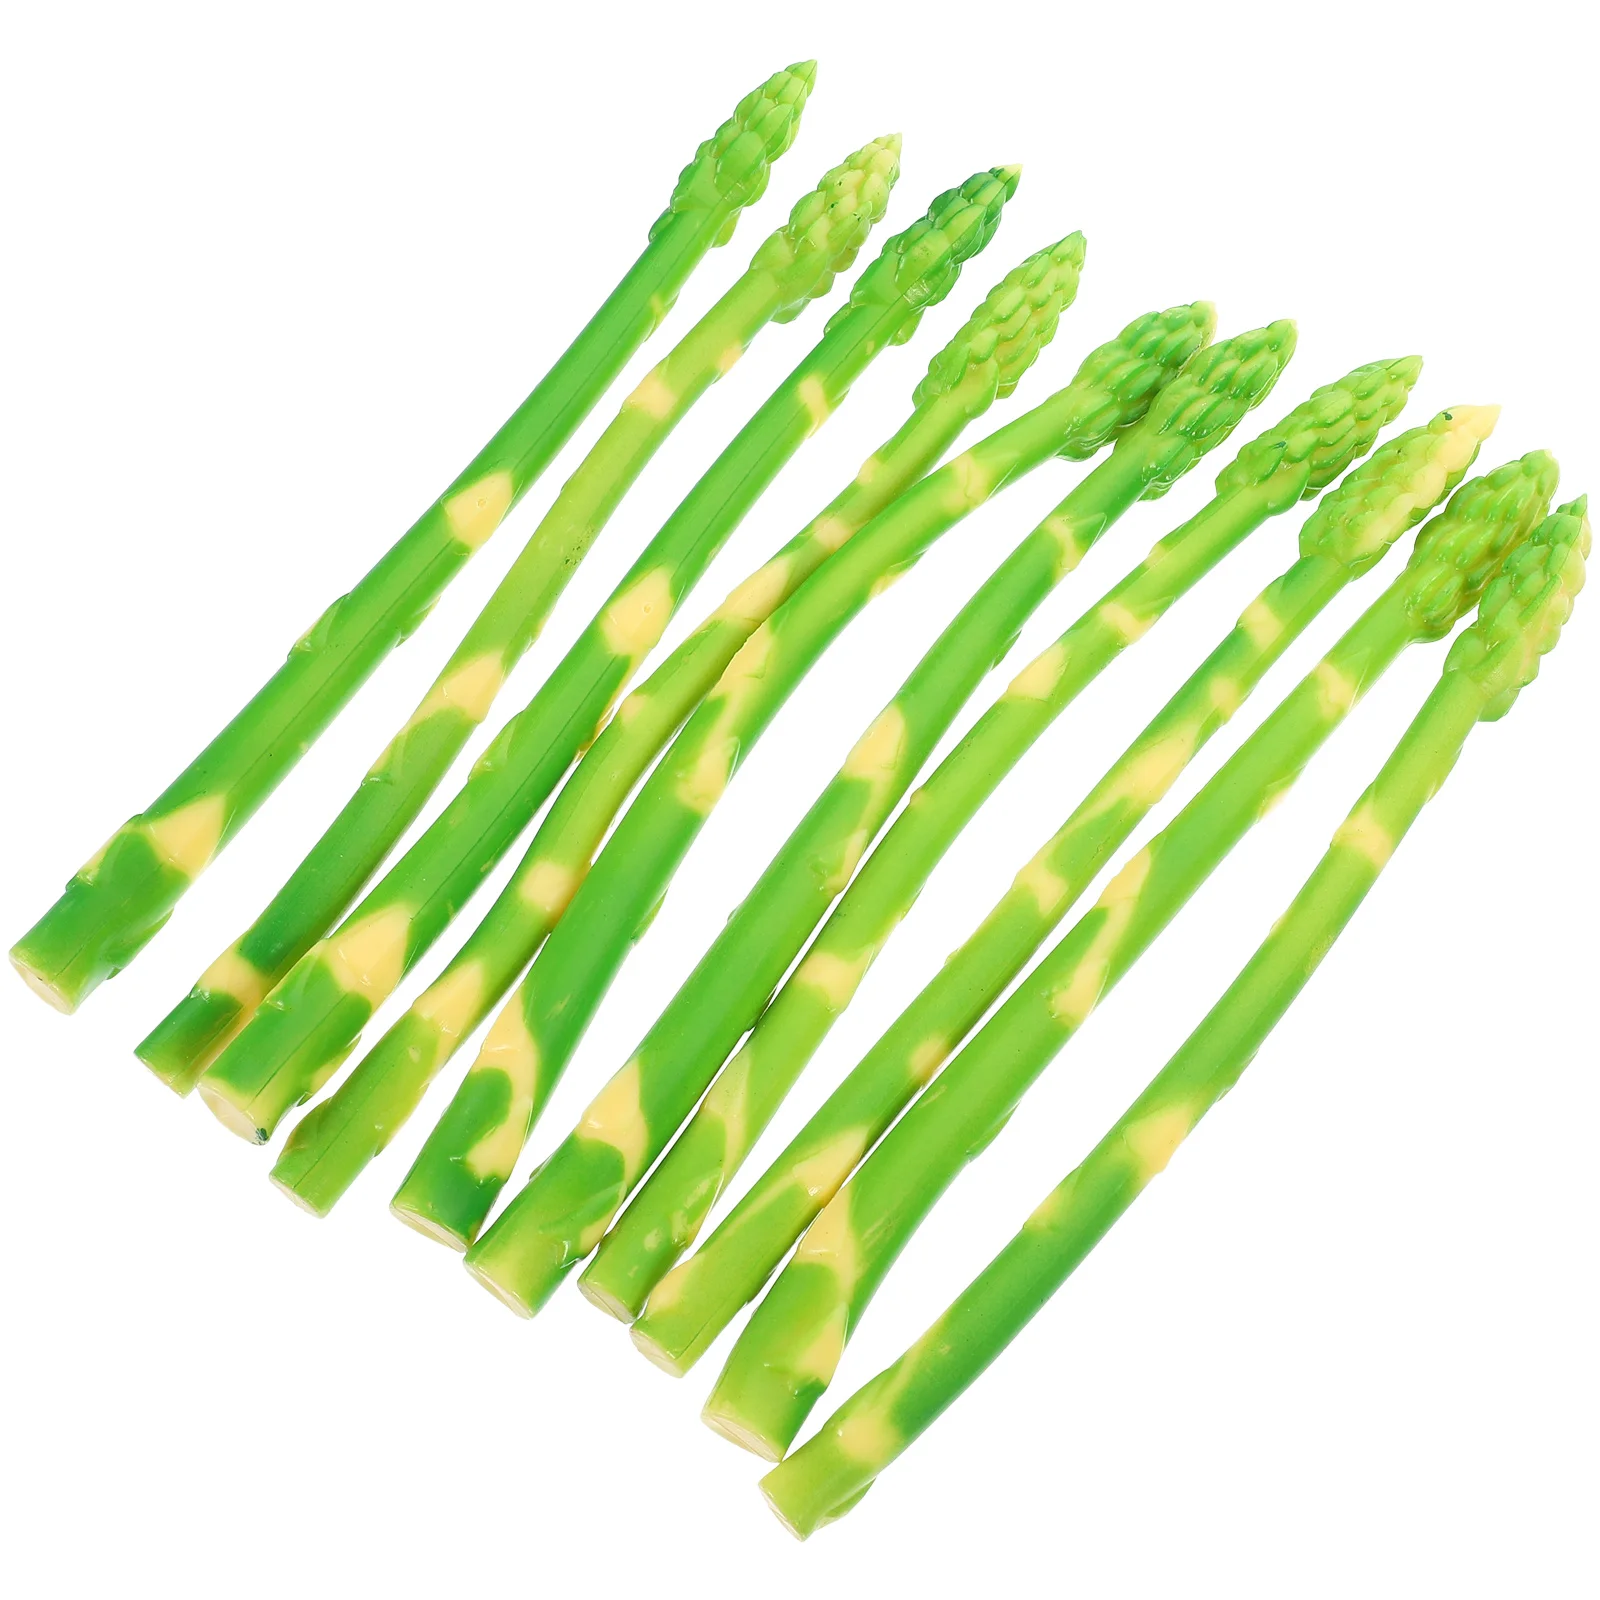 

Plastic Reusable Practical Fake Asparagus Artificial Asparagus Model Scene Layout Props for Photography Home Displaying